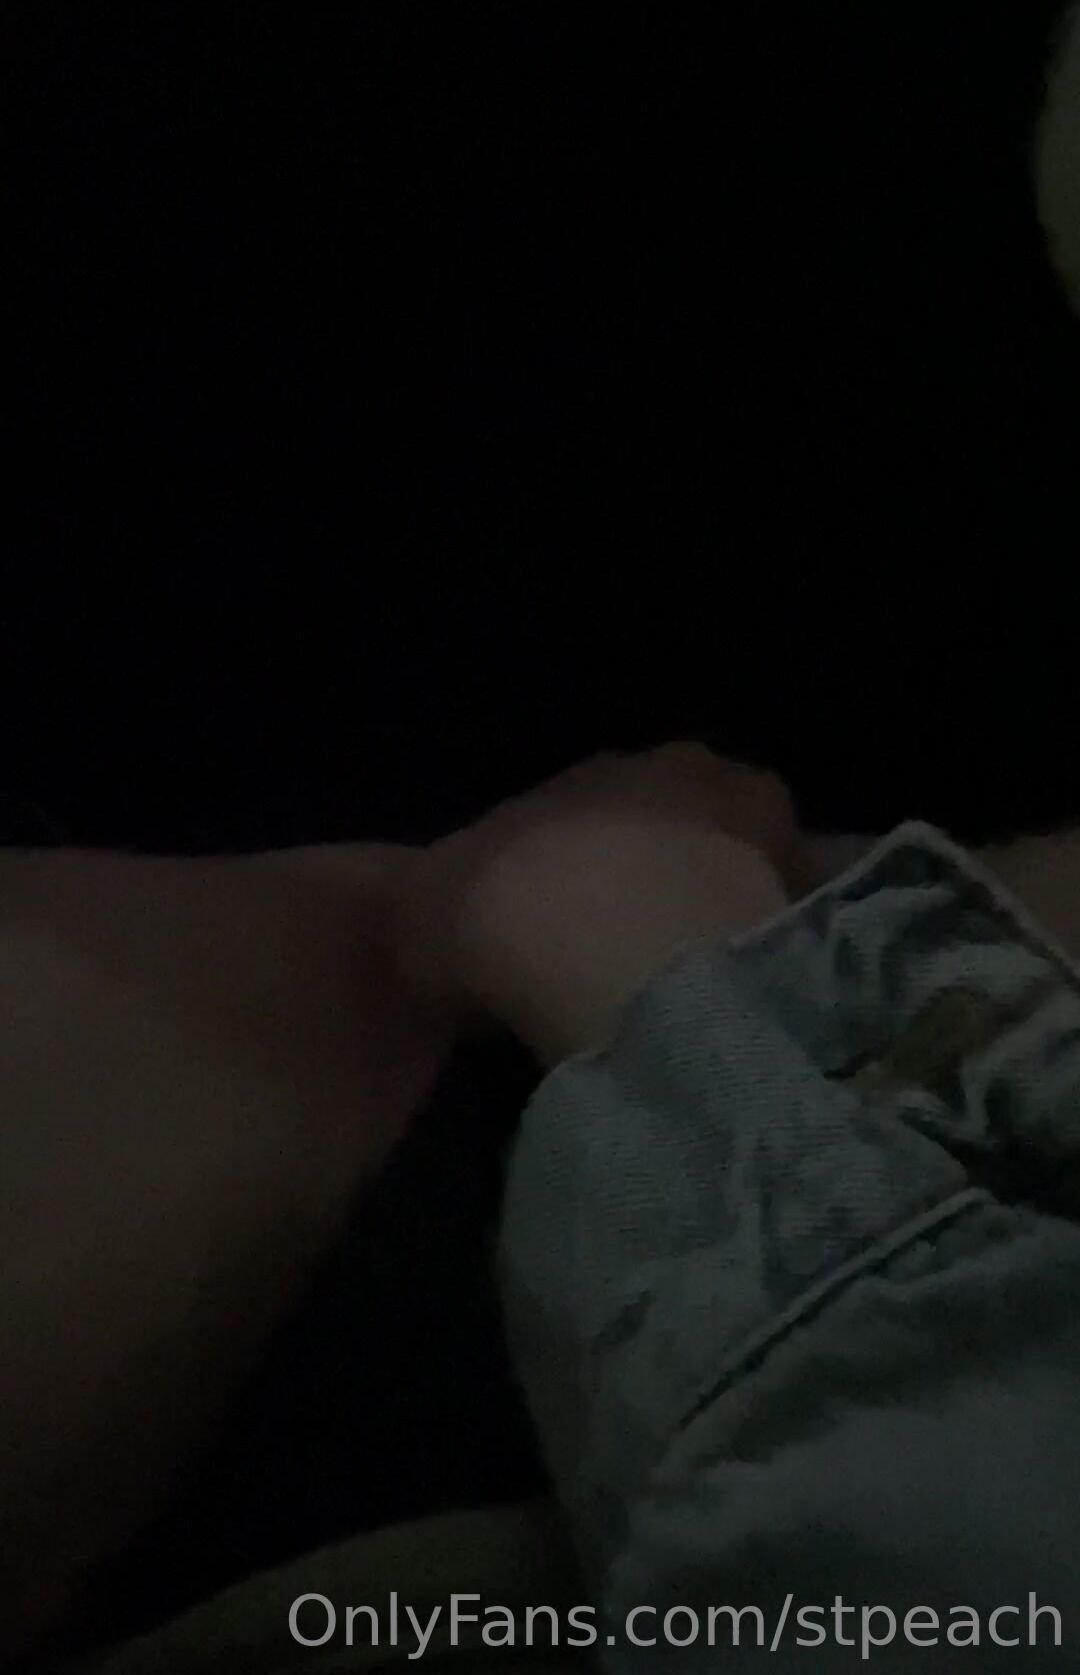 Stpeach Came Home Drunken And Recorded This For Her Onlyfans Leaked Tape